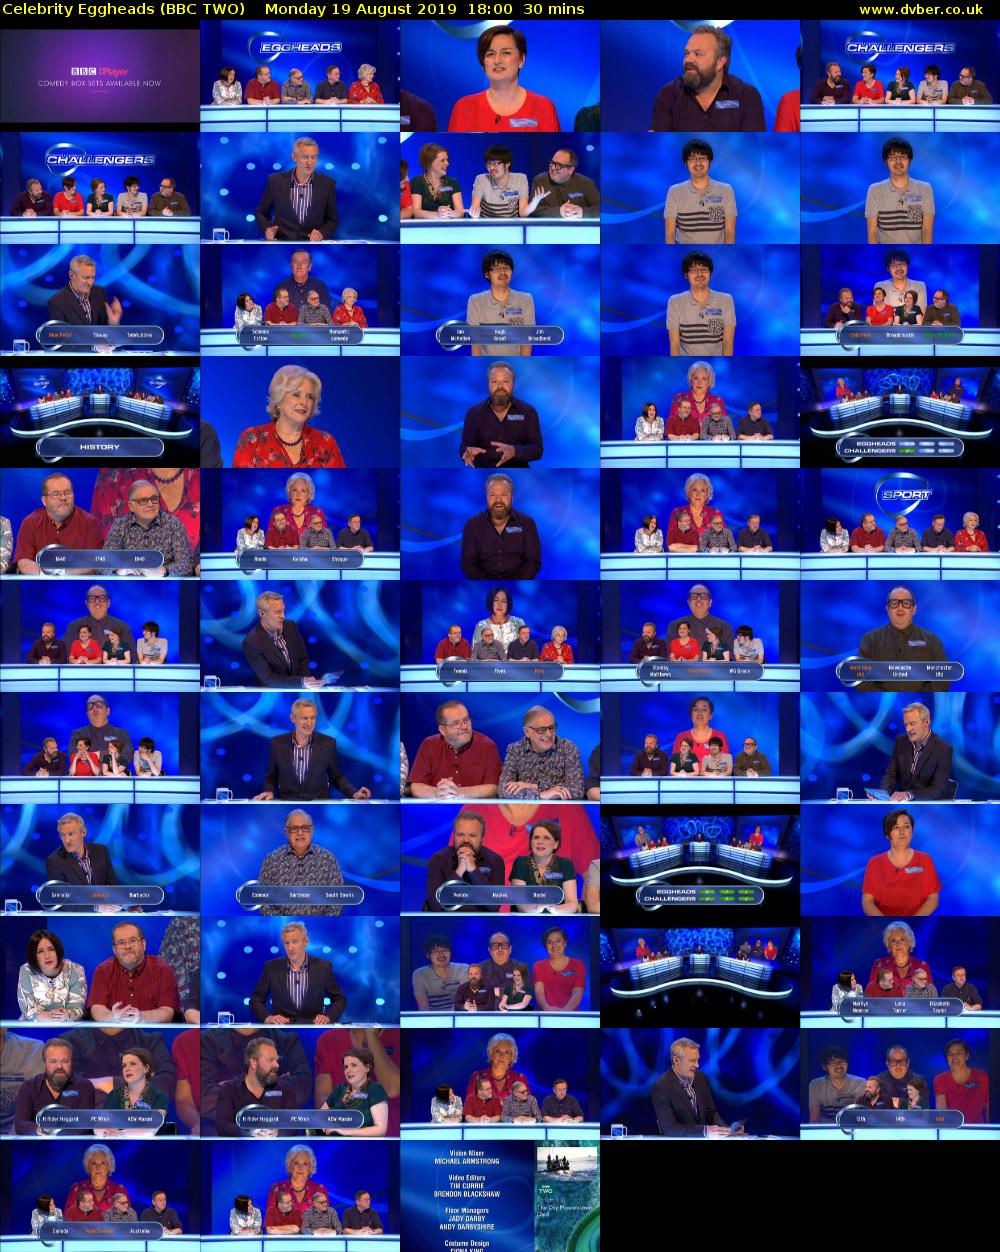 Celebrity Eggheads (BBC TWO) Monday 19 August 2019 18:00 - 18:30